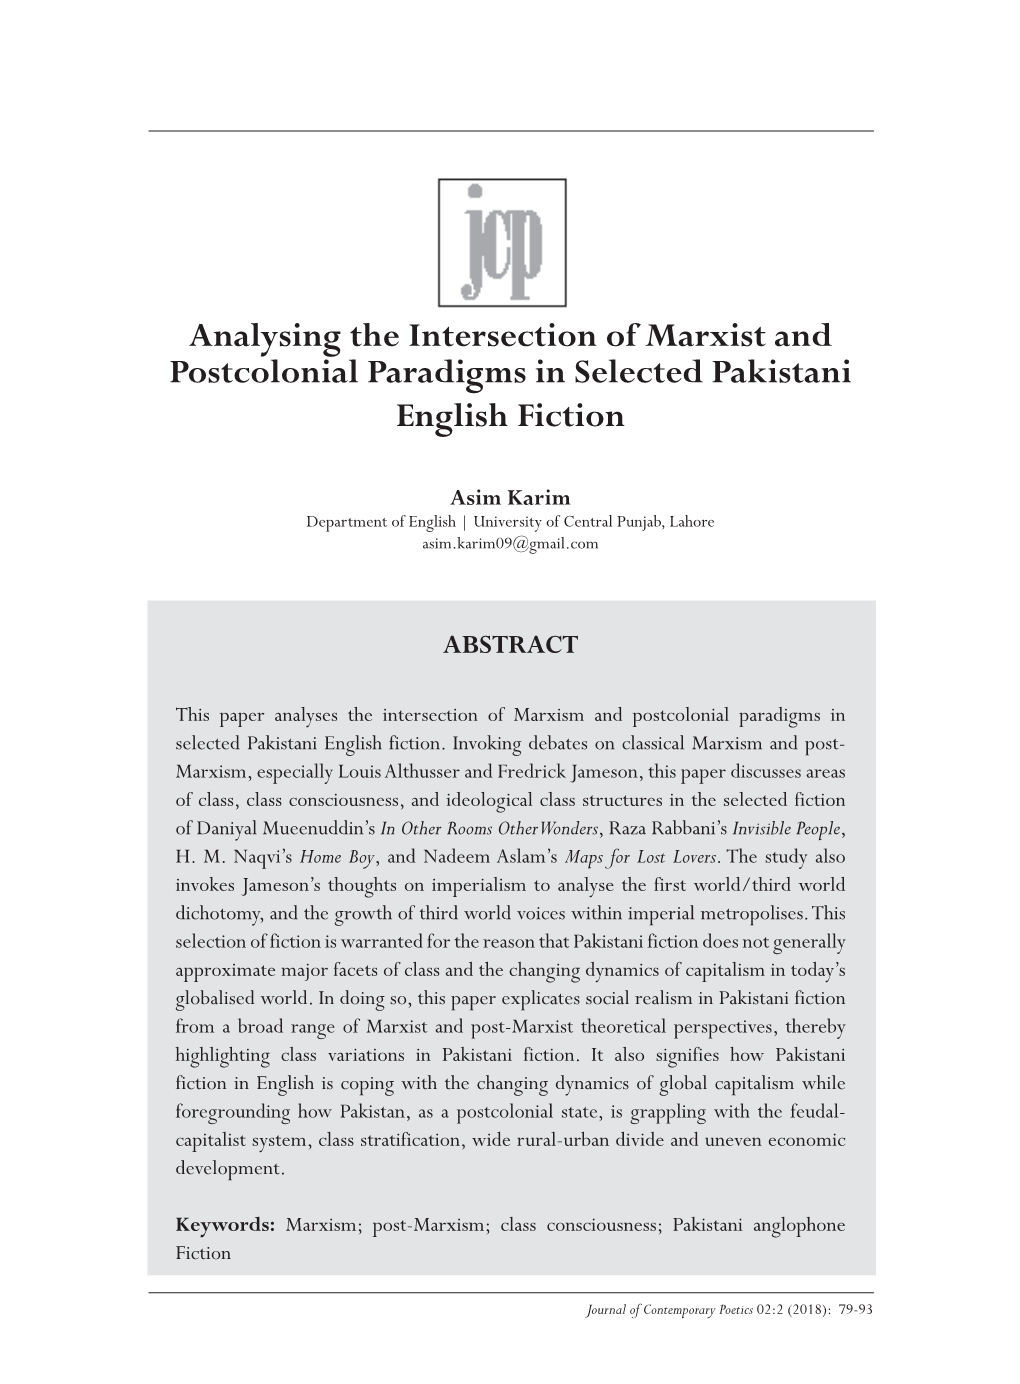 Analysing the Intersection of Marxist and Postcolonial Paradigms in Selected Pakistani English Fiction